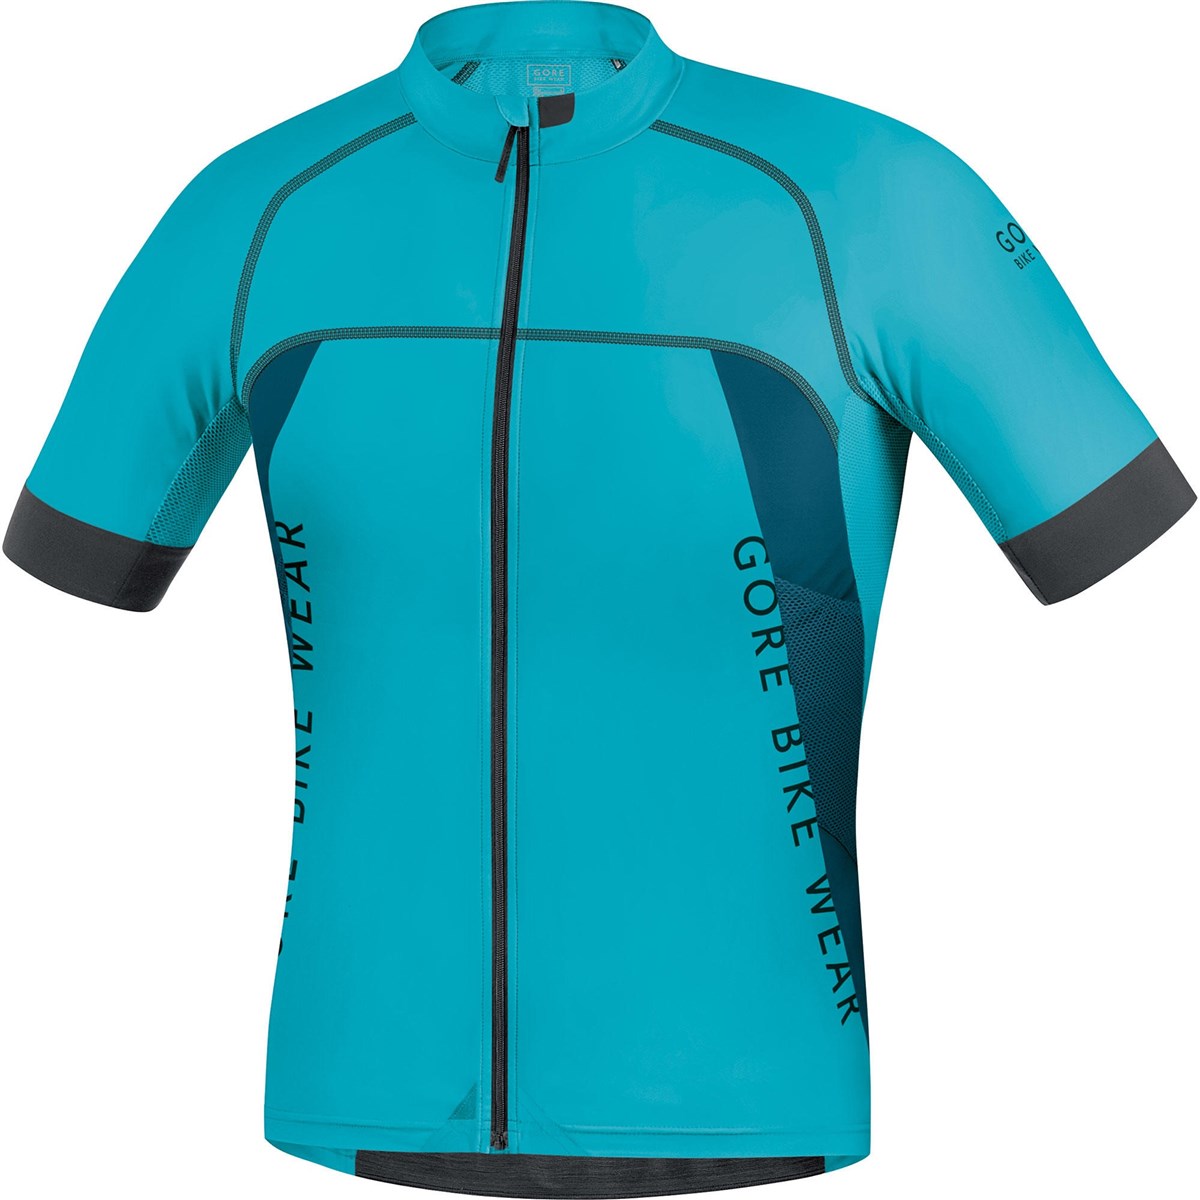 Gore Alp-X Pro Short Sleeve Jersey AW17 product image